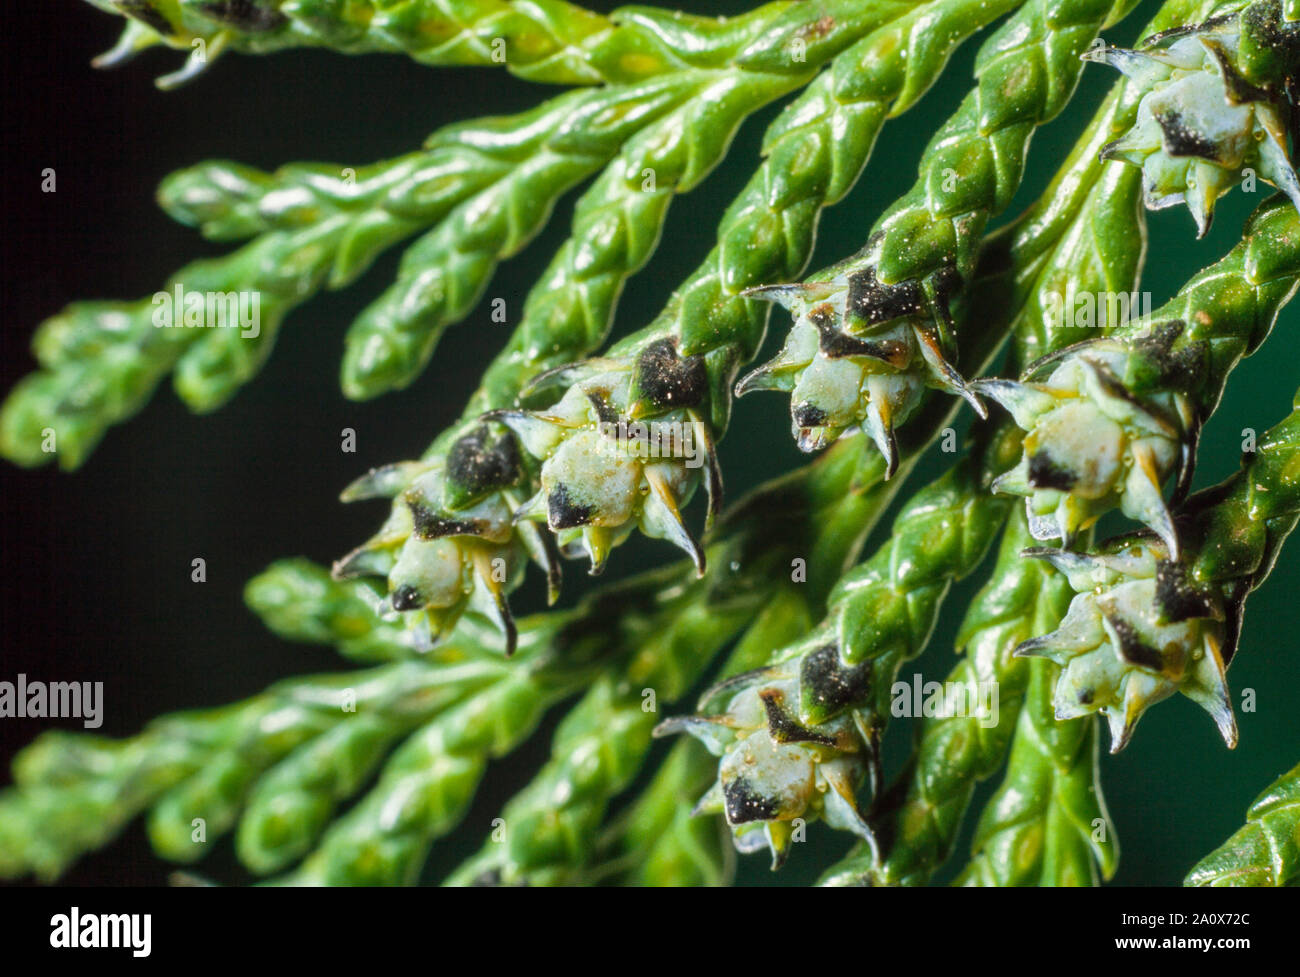 Lawson Cypress, Chamaecyparis lawsoniana, native to Western USA, close-up detail of young female cones Stock Photo